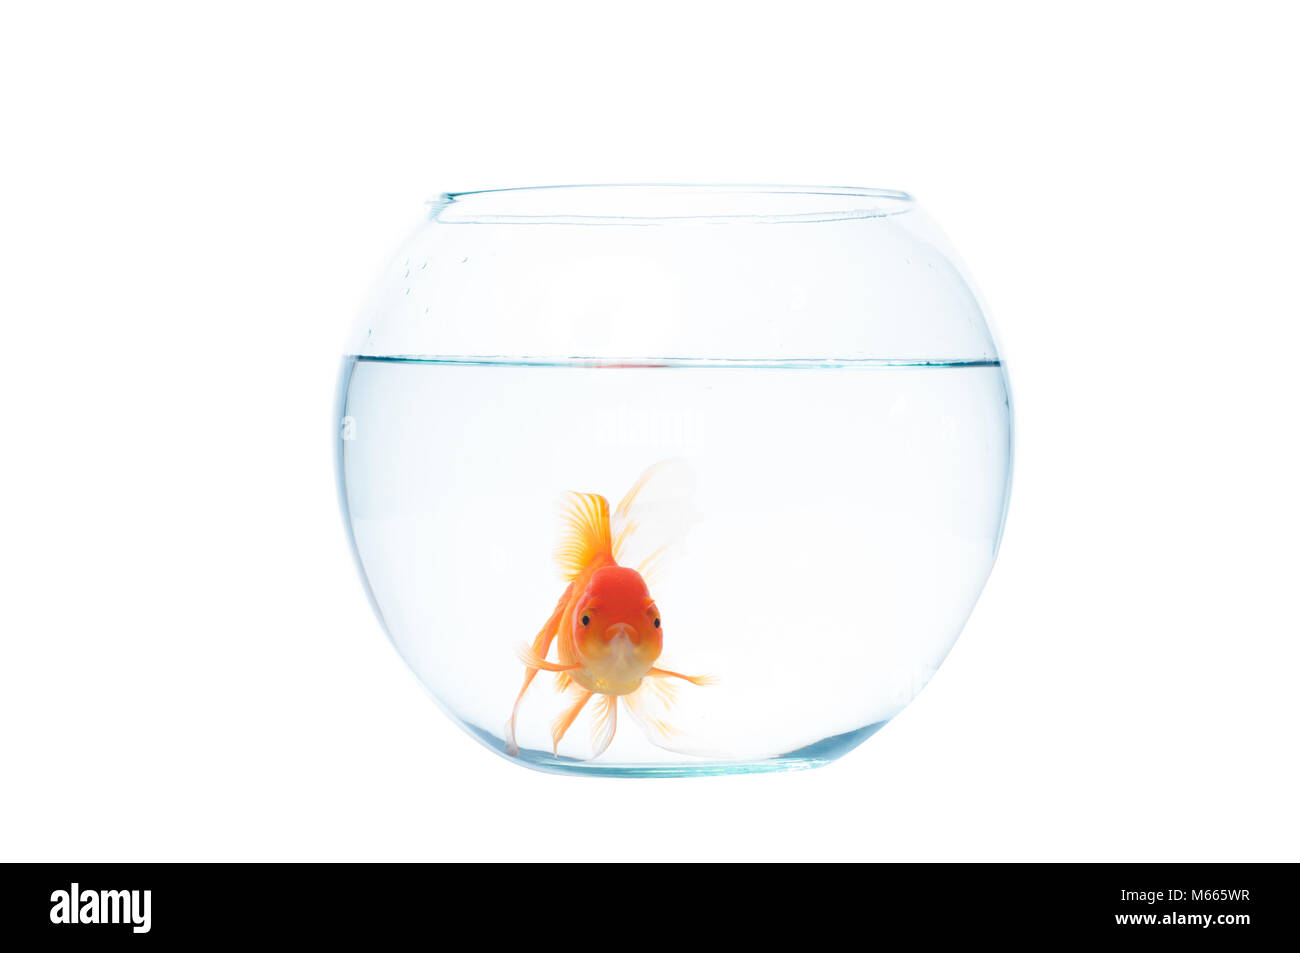 Gold fish with fishbowl isolation on the white background Stock Photo